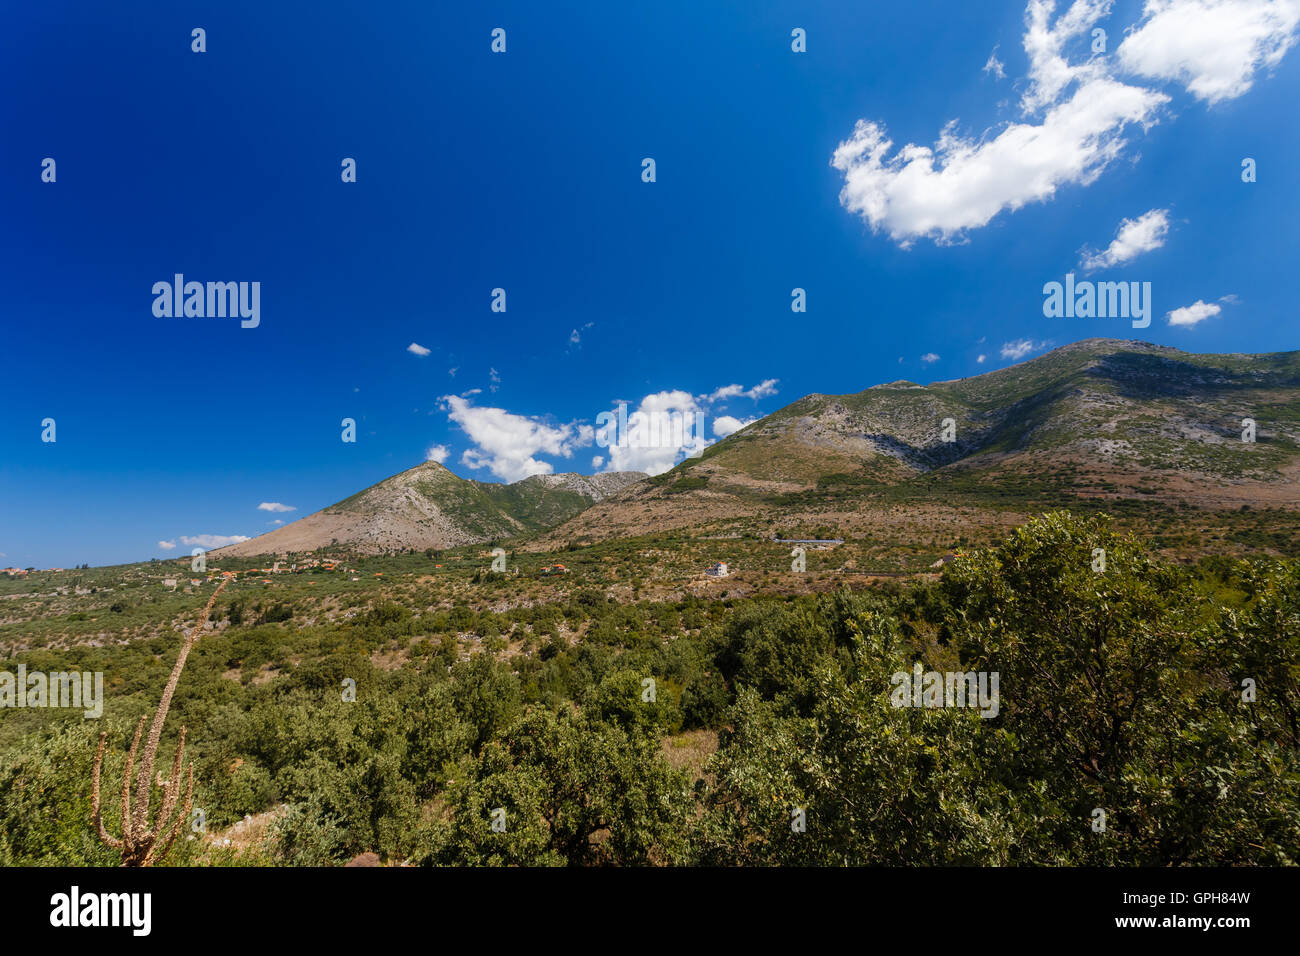 The Taygetos mountains covered in green trees against a partly cloudy sky. Stock Photo